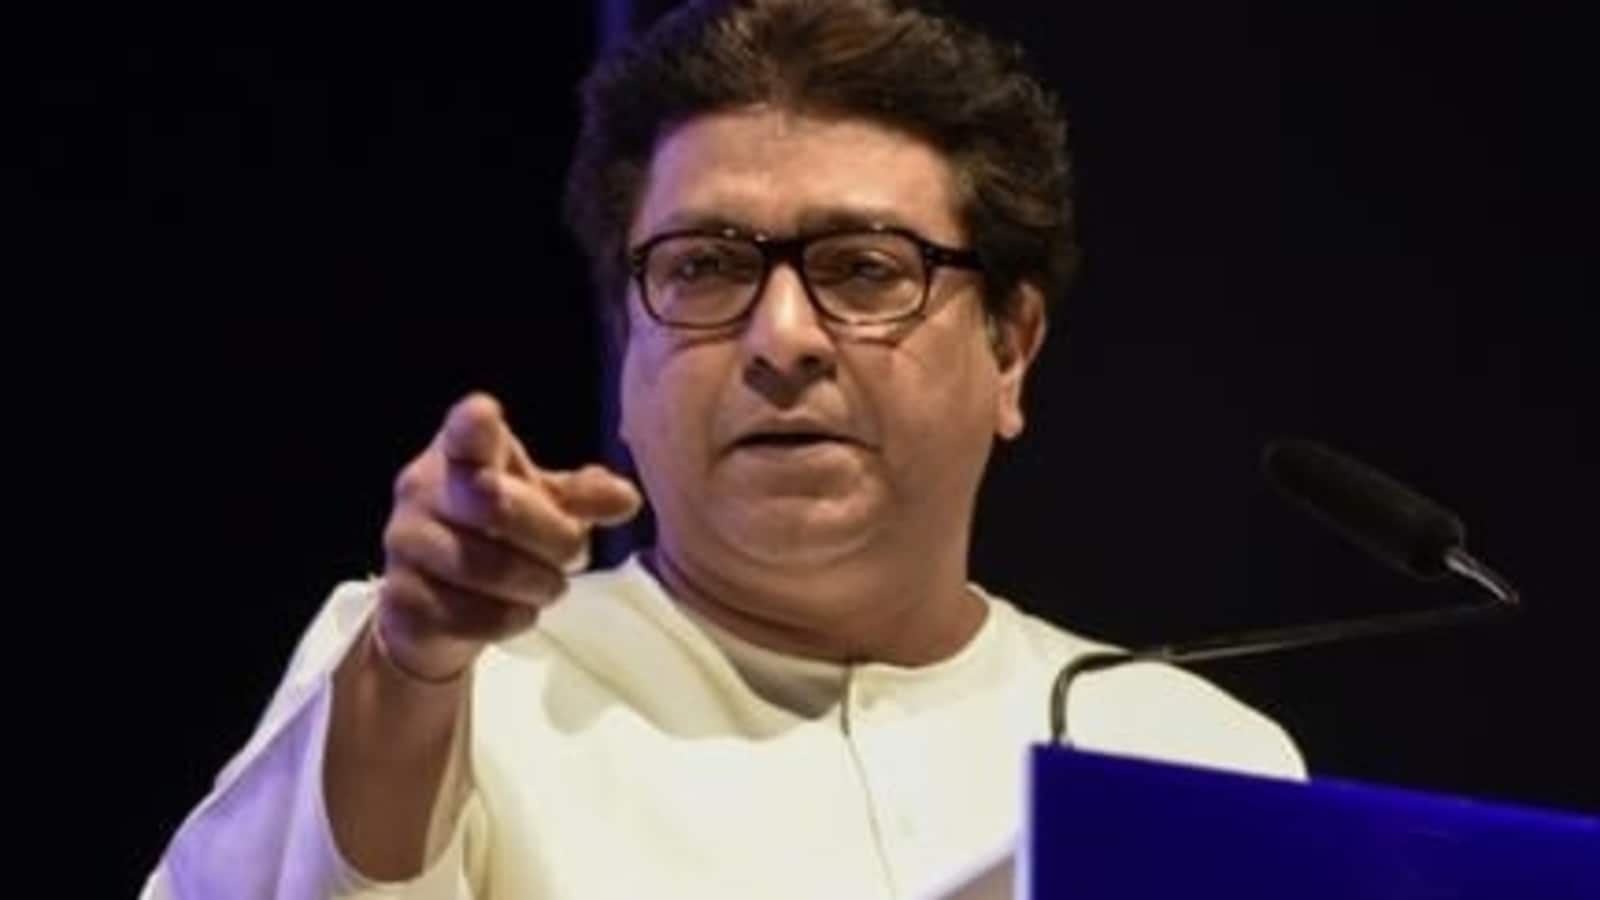 Raj Thackeray now gives ultimatum: 'Remove loudspeakers from mosques,  or...' | Mumbai news - Hindustan Times